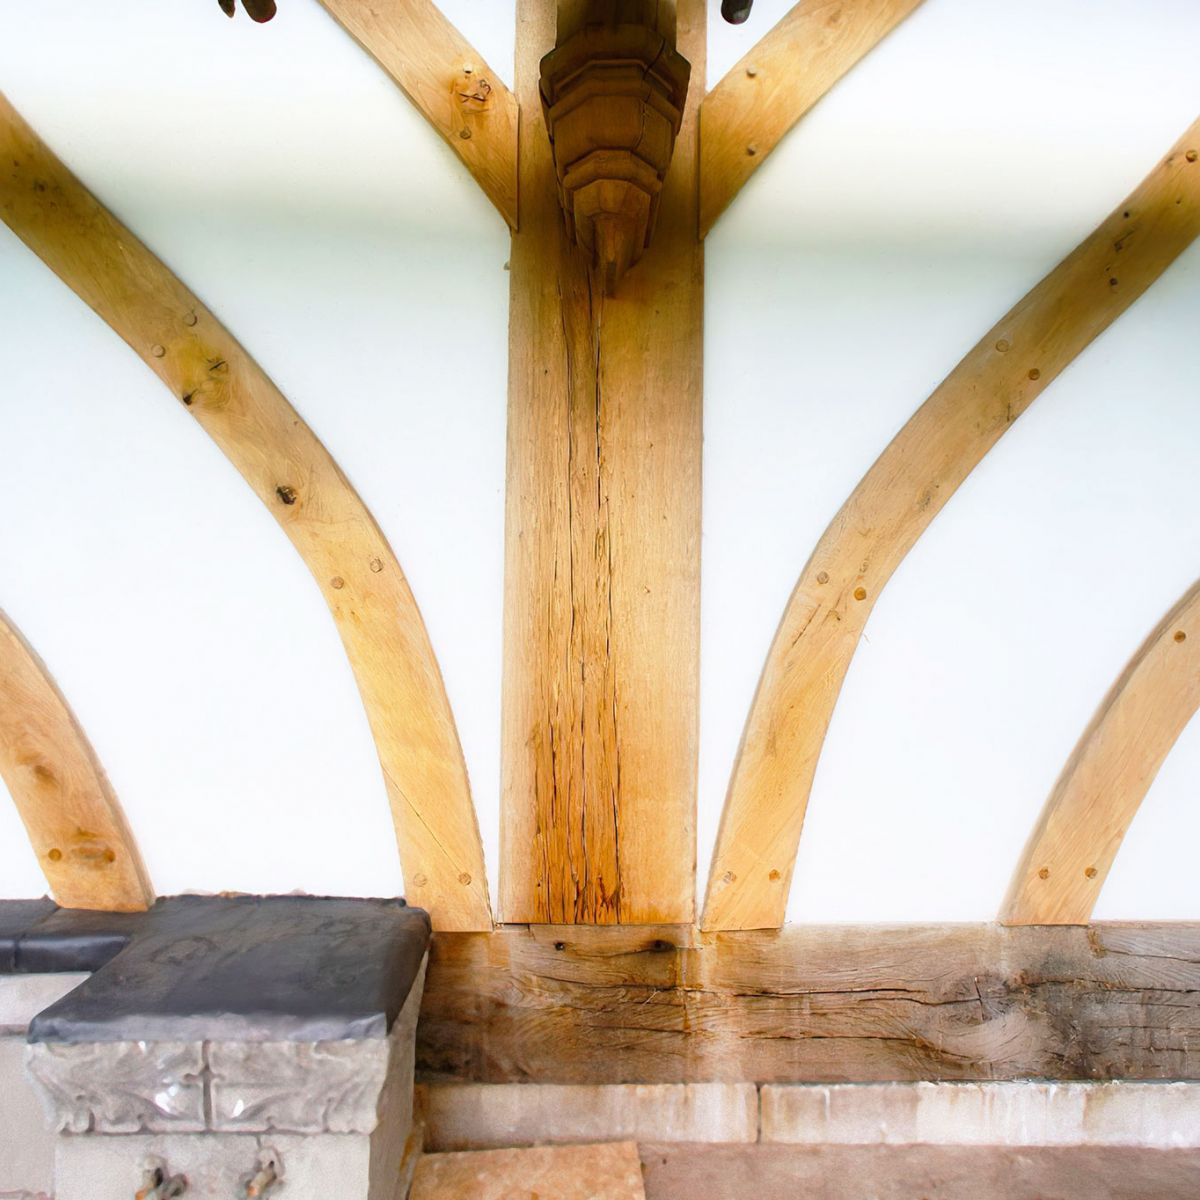 Oakwork Carpentry on a Traditional Building